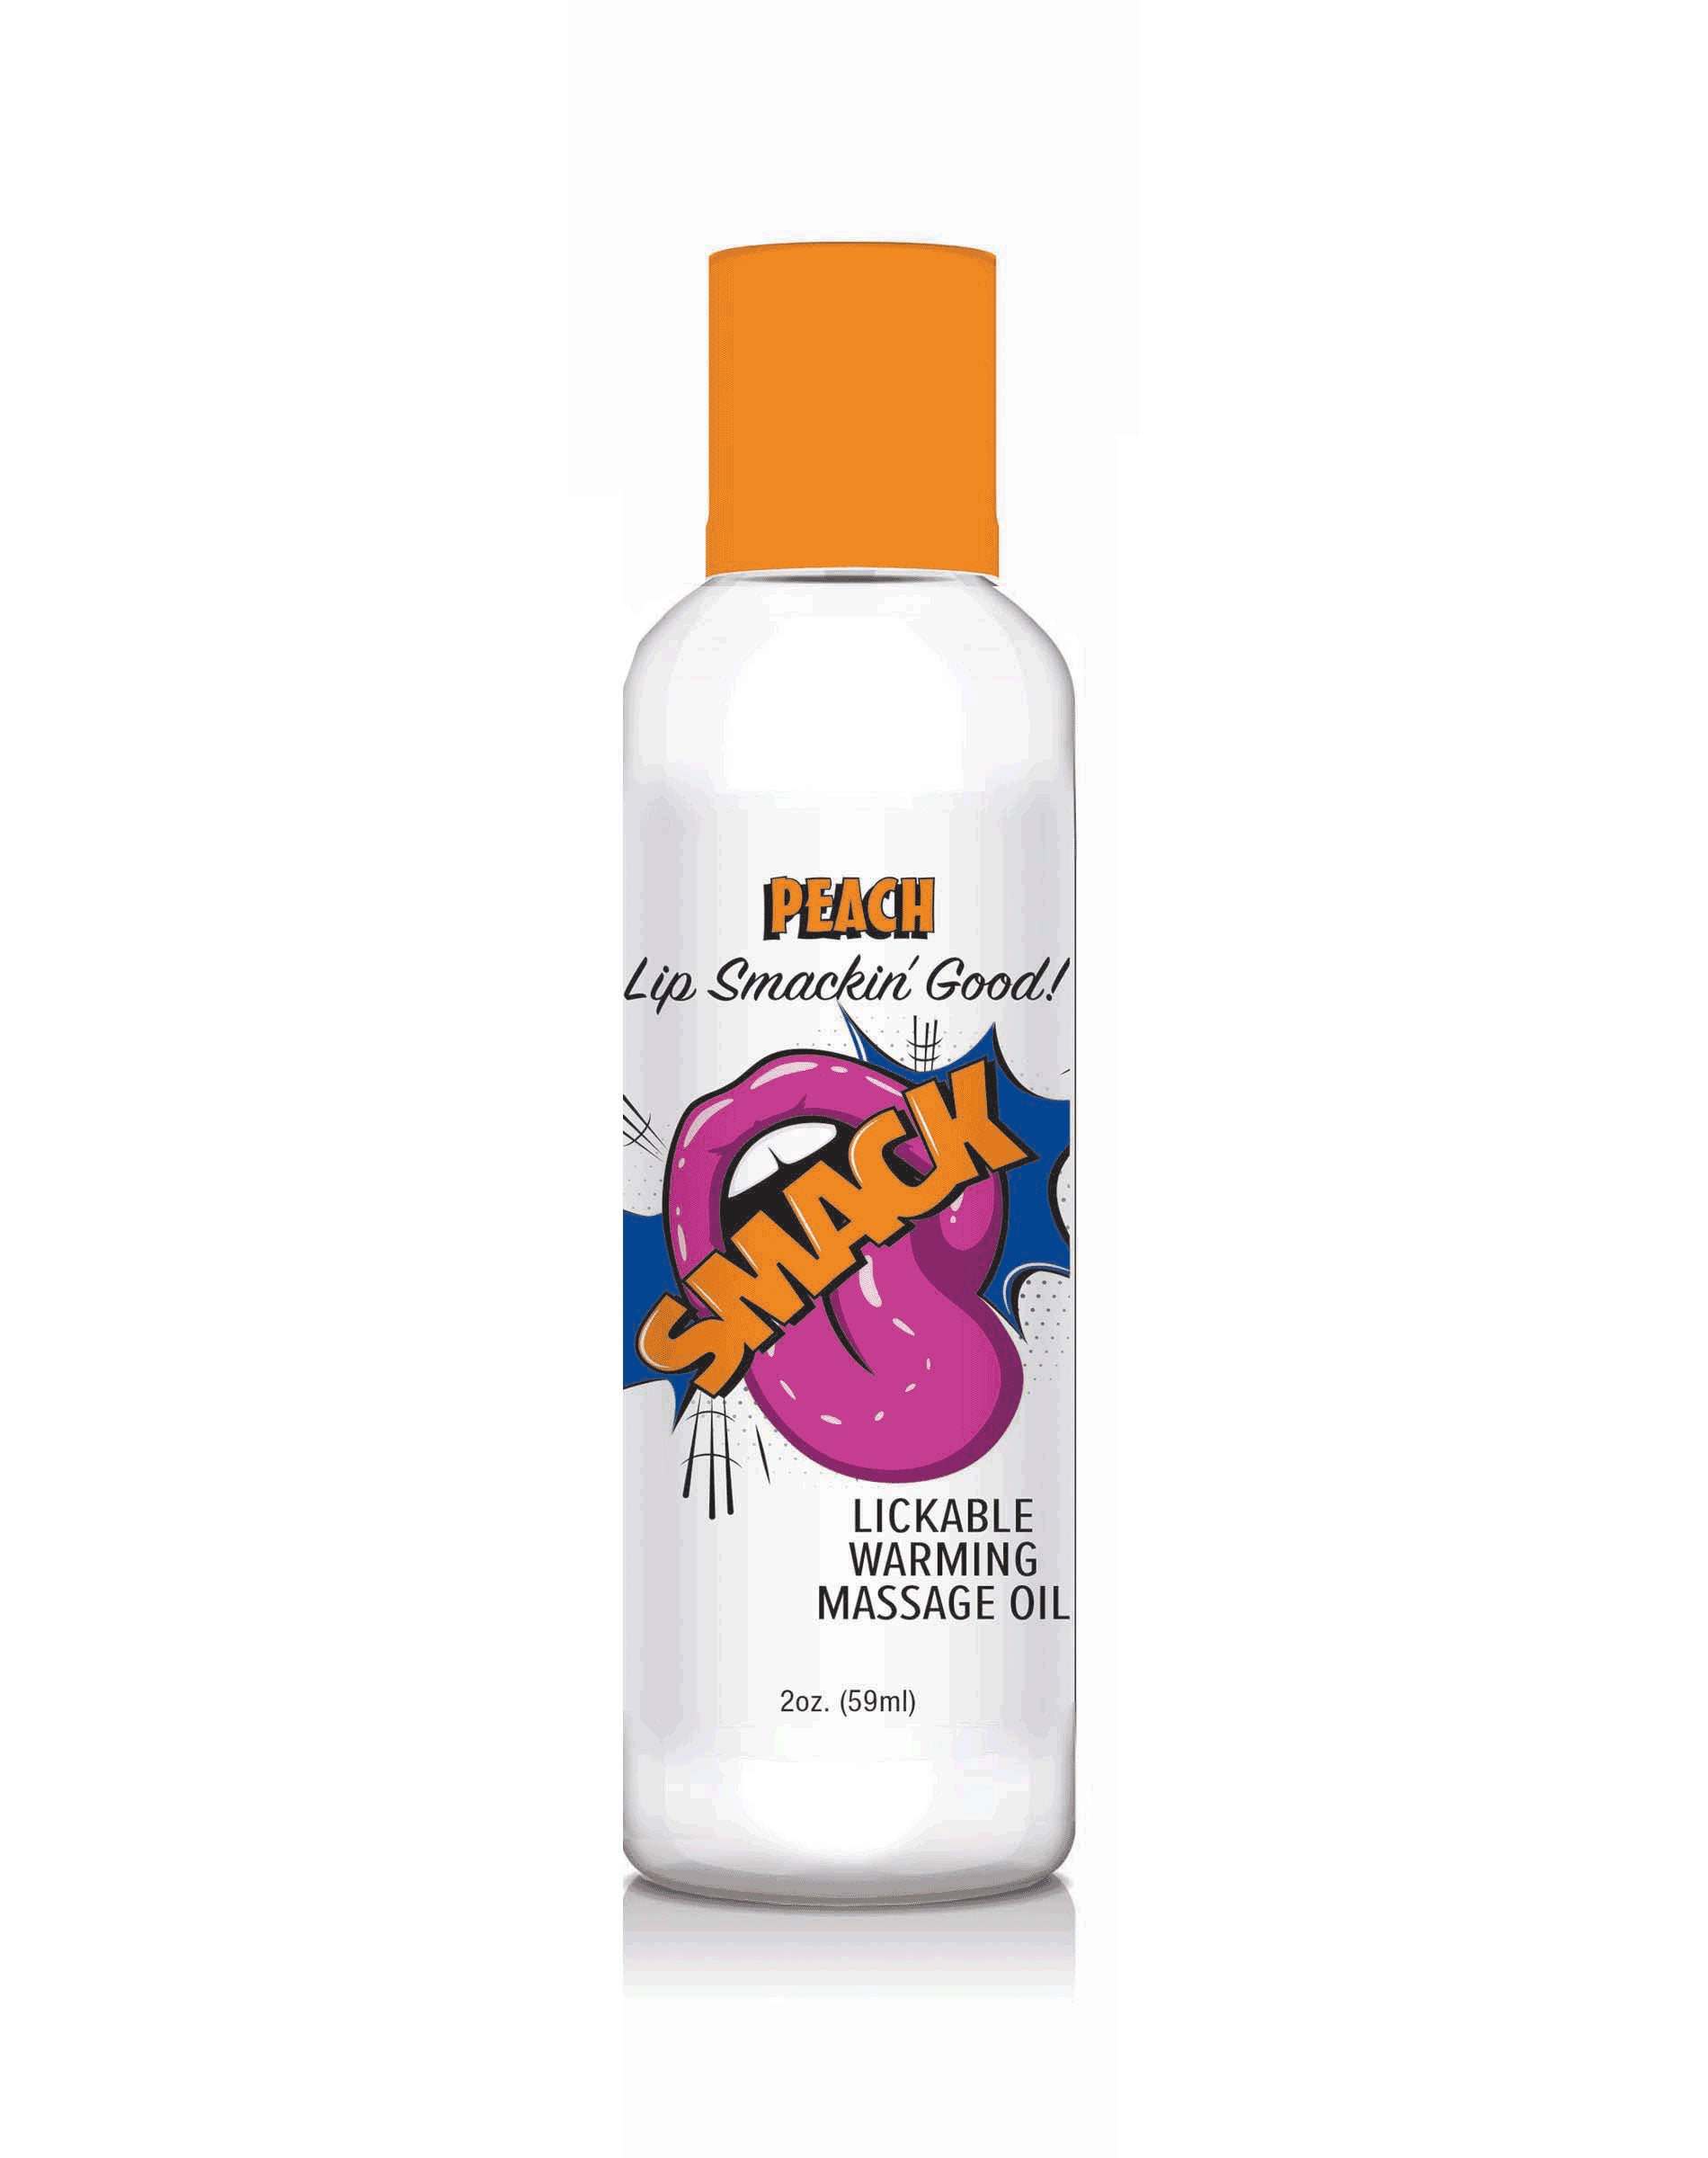 Smack Warming and Lickable Massage Oil - Peach 2  Oz-1